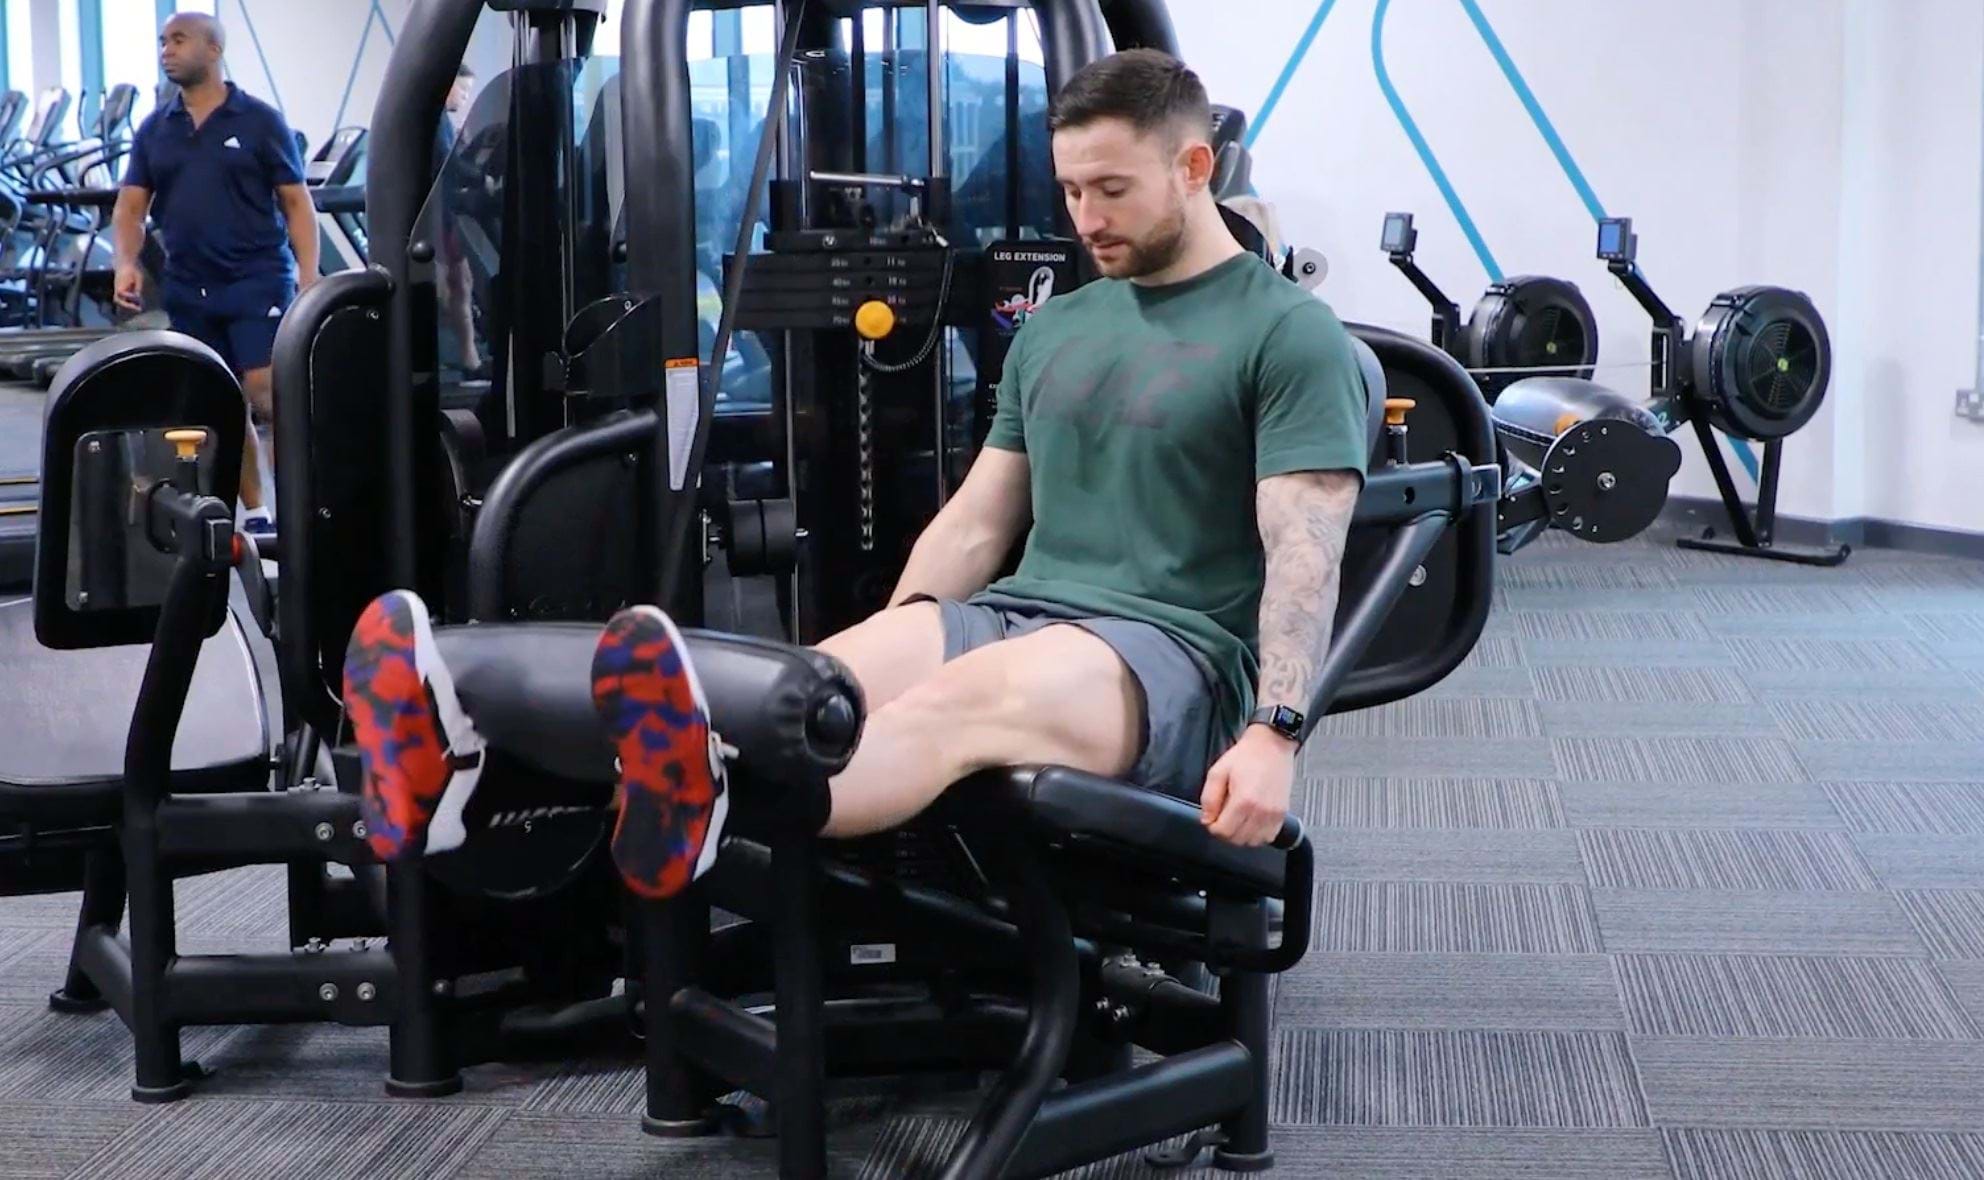 Leg Extensions: How To, Form Tips and At-Home Variations